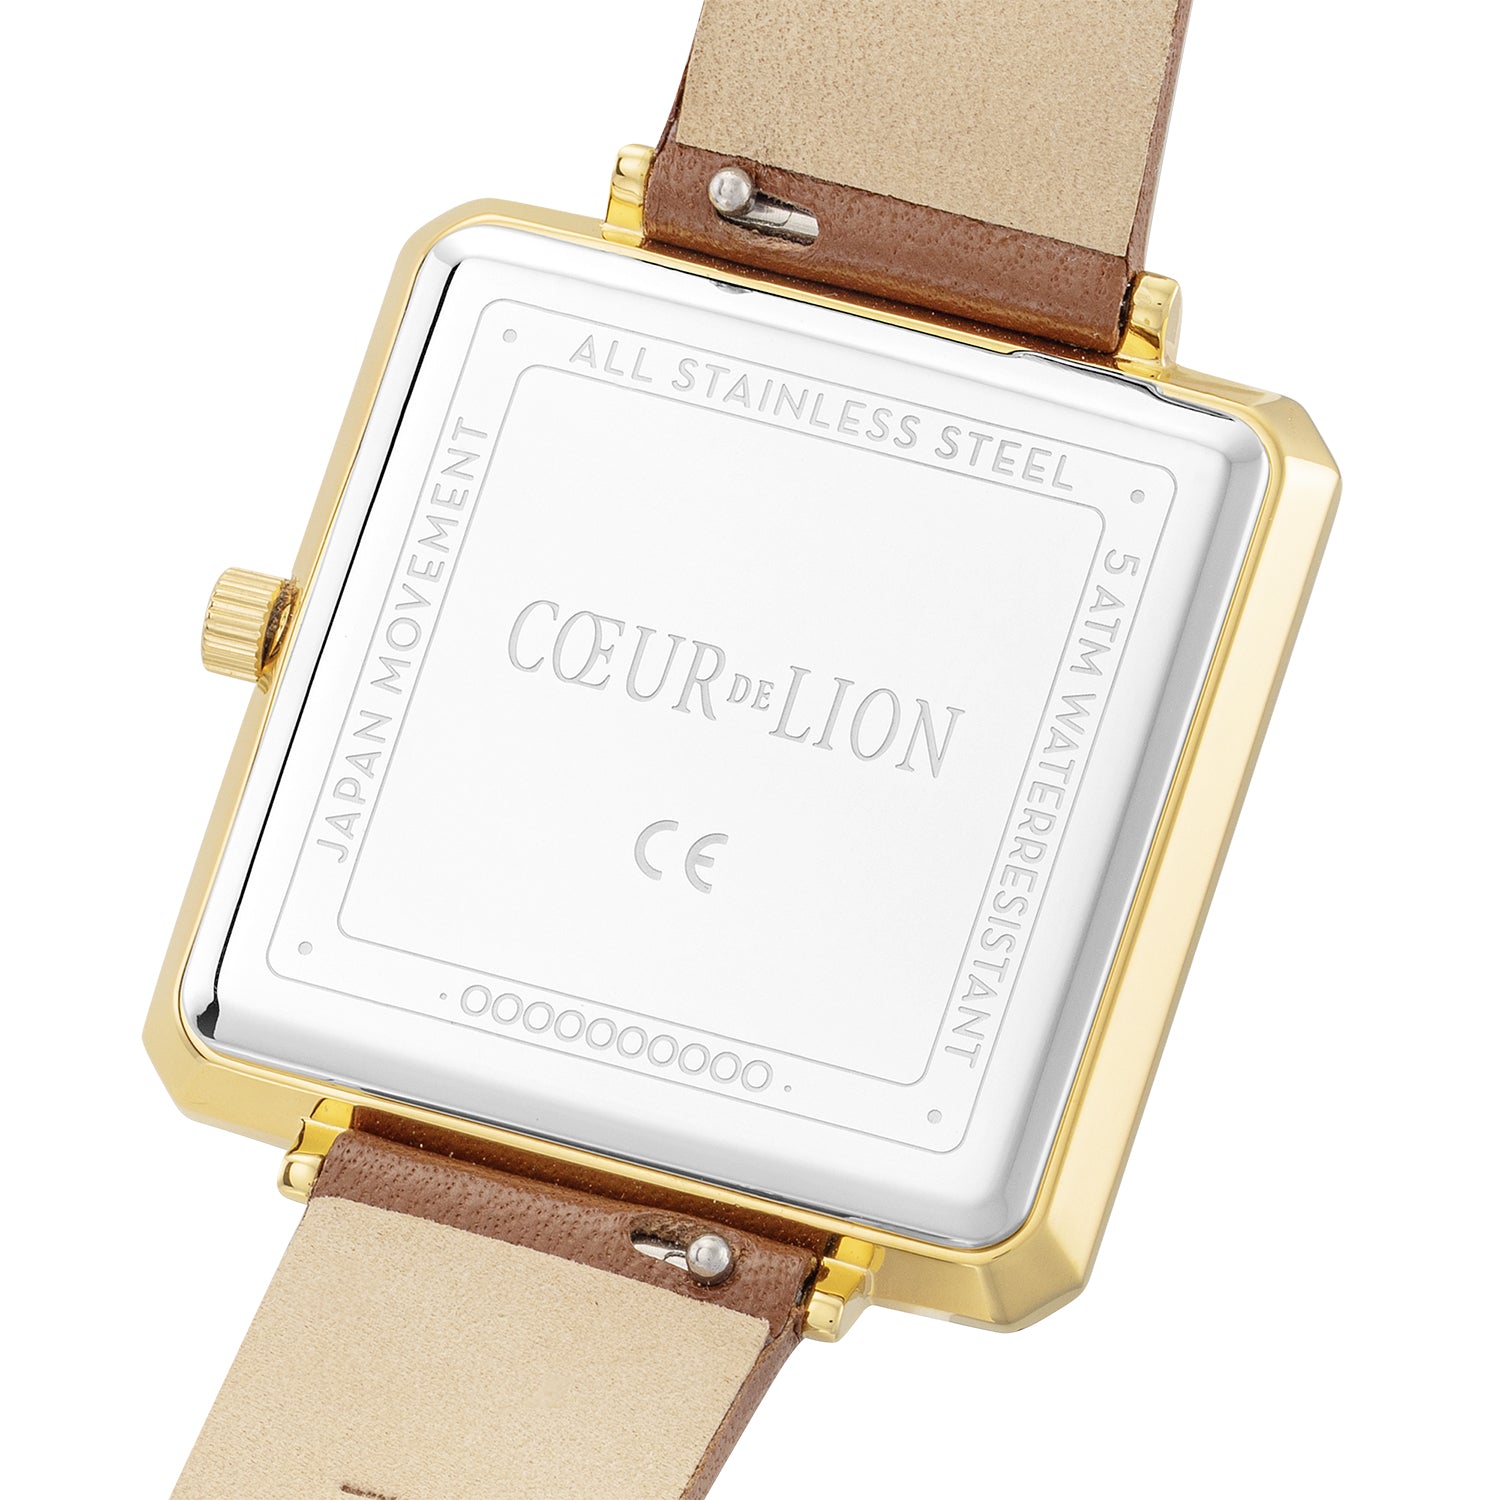 Classy Brown Iconic Cube Watch Gold 7632_71_1116